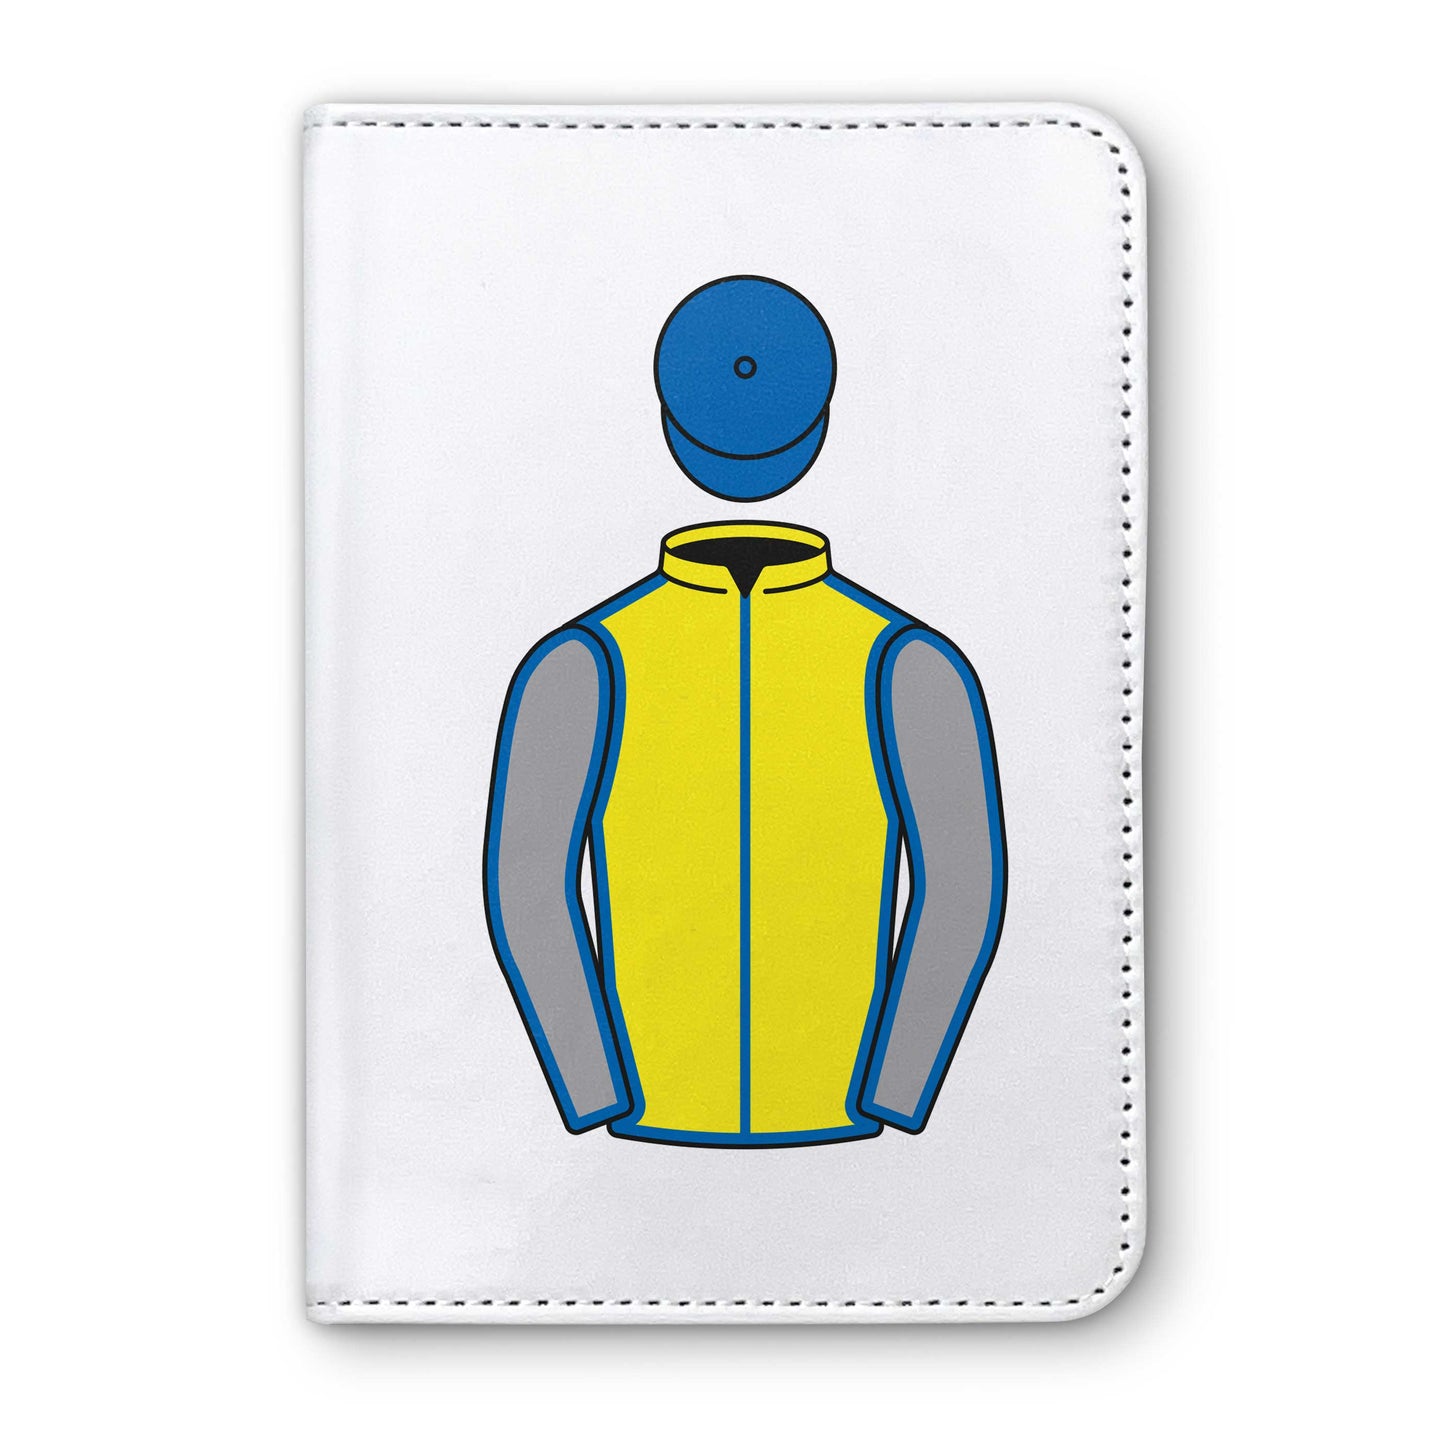 T G Leslie Horse Racing Passport Holder - Hacked Up Horse Racing Gifts